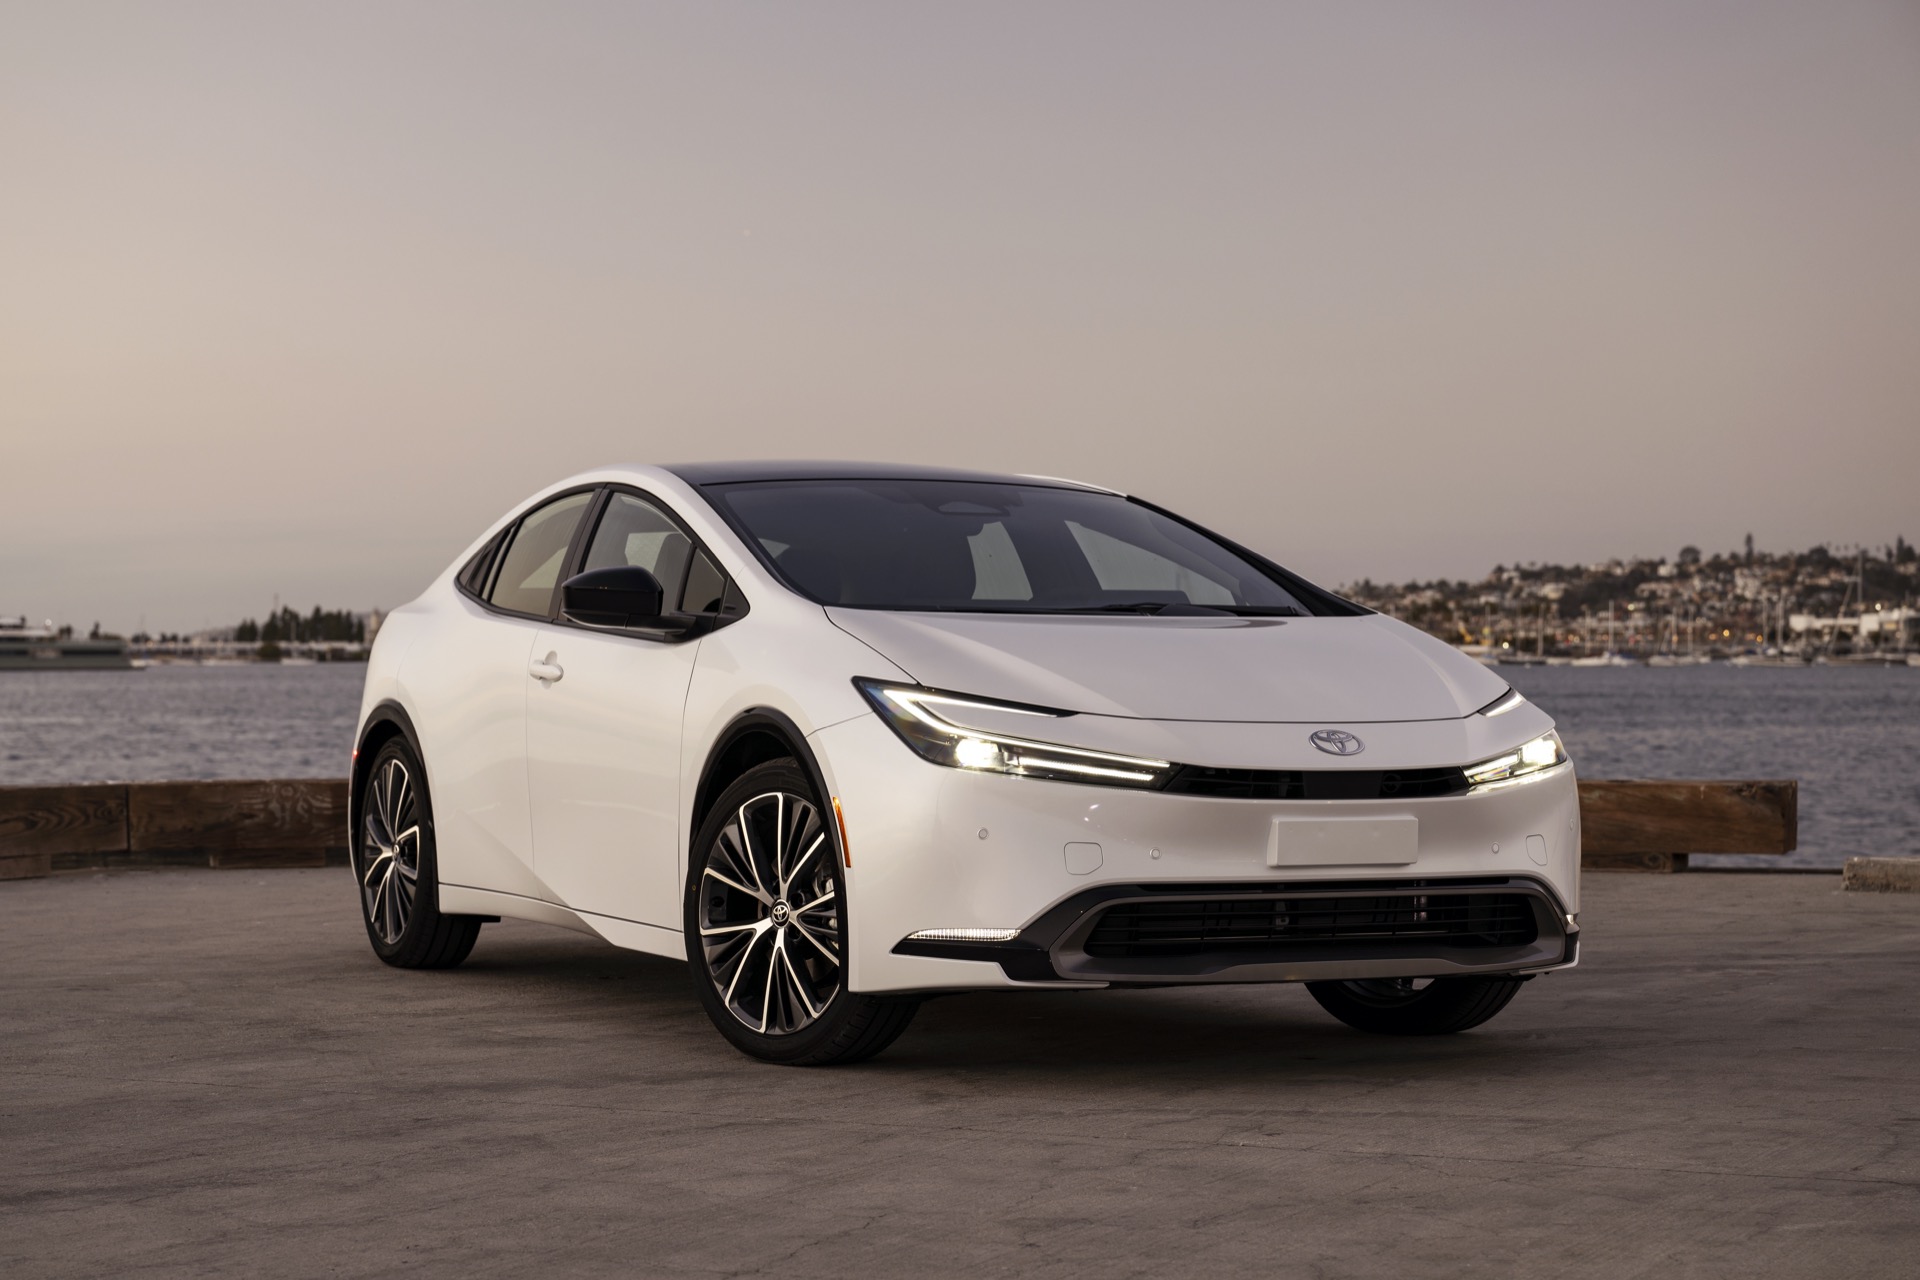 Toyota recasts hybrids without charge ports as "hybrid EVs"